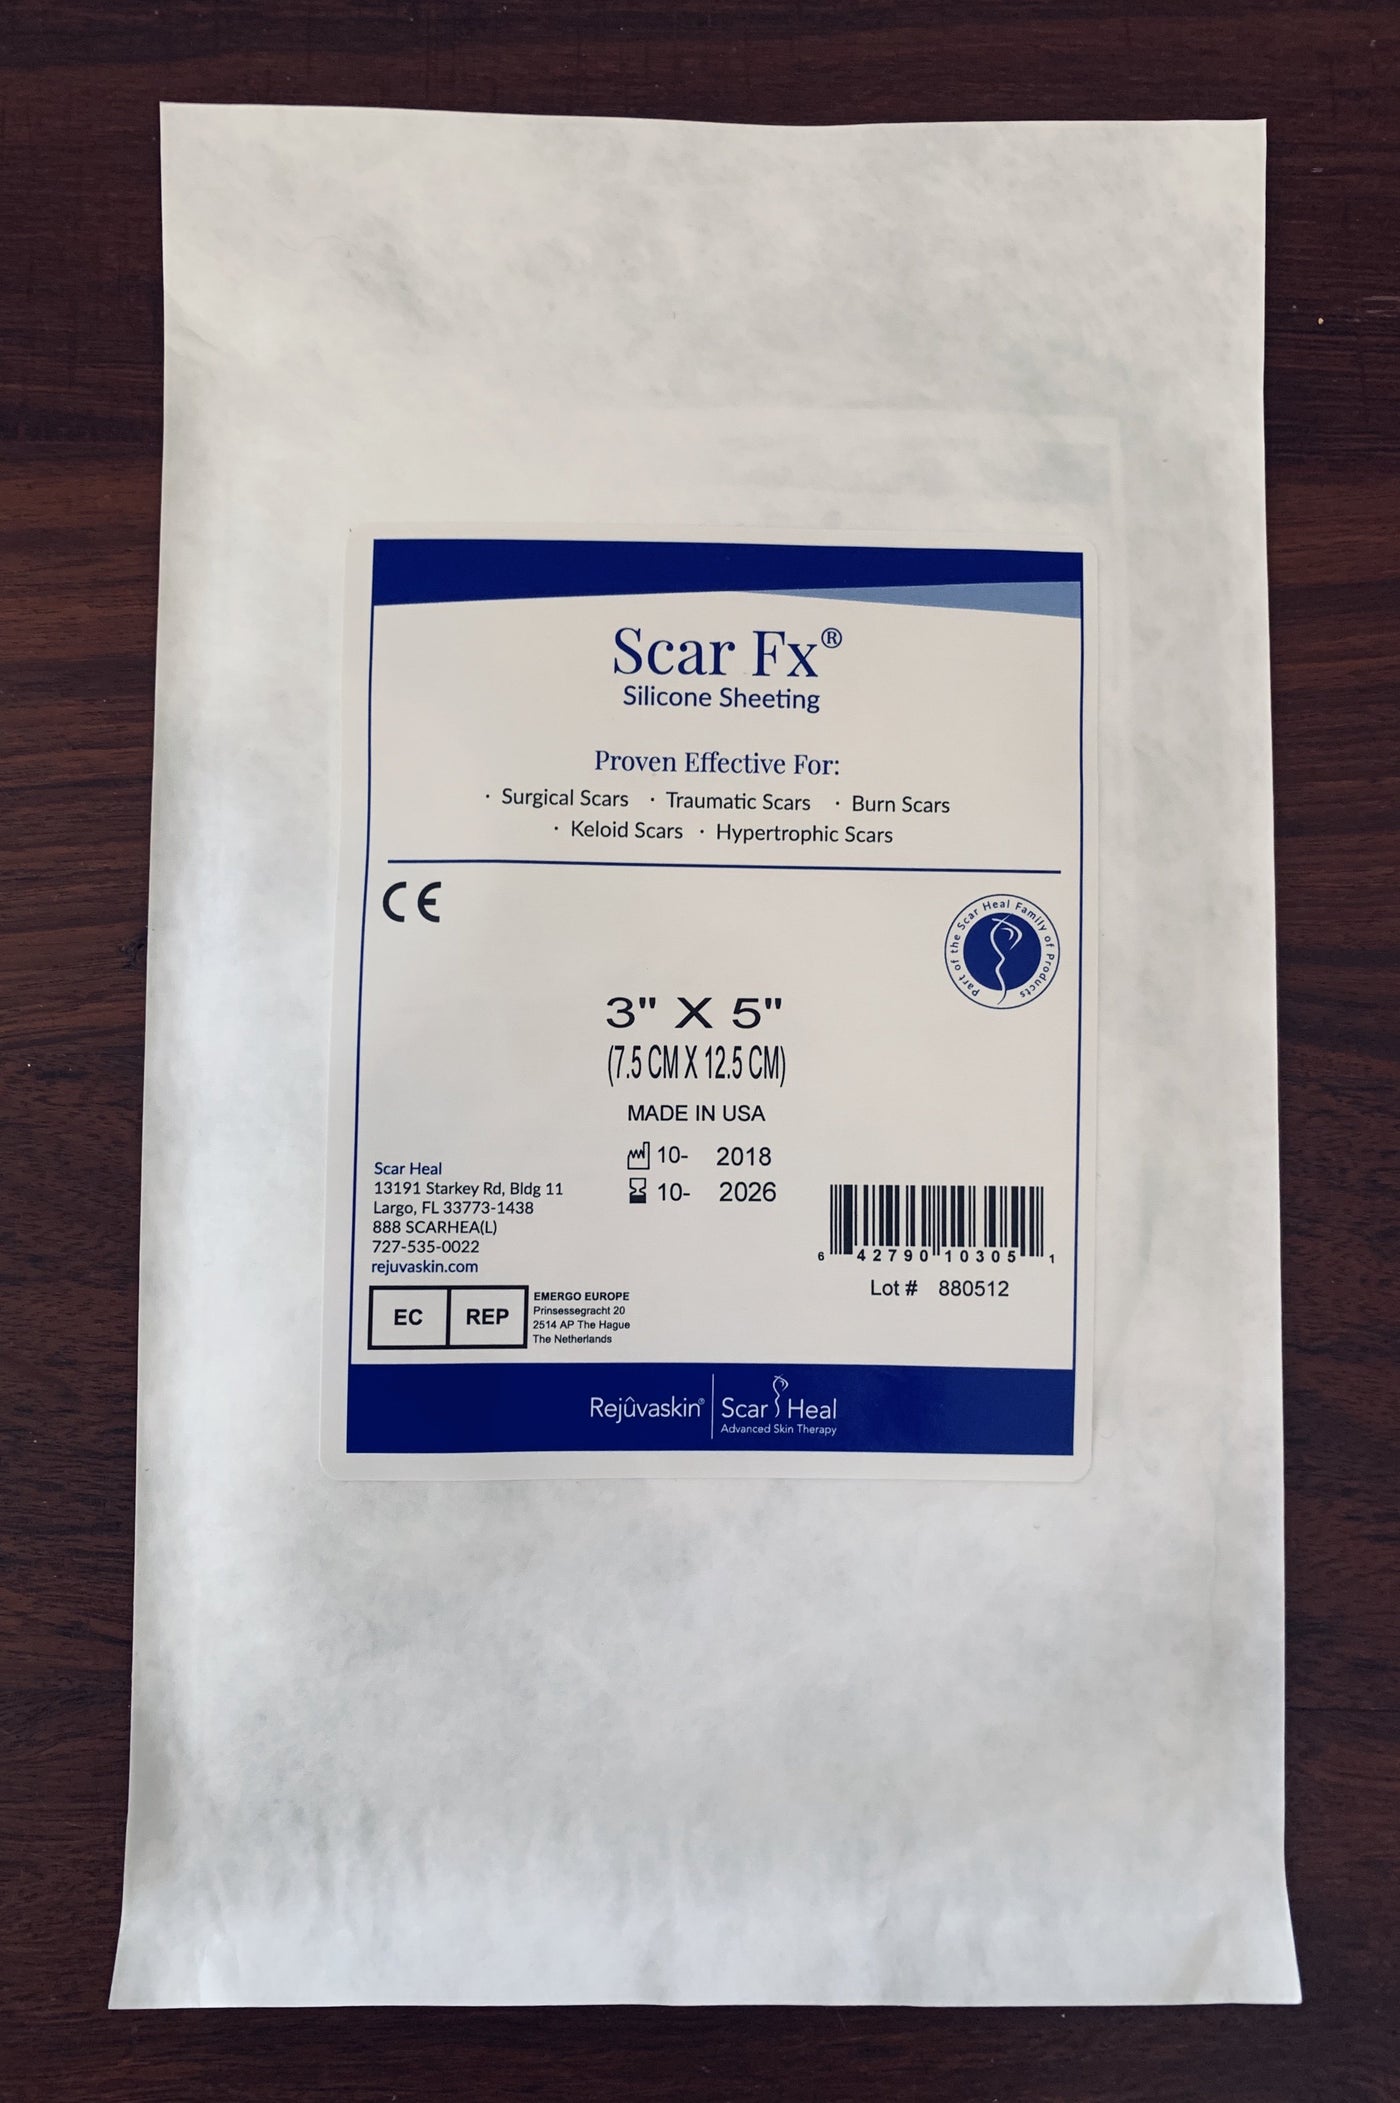 Scar Fx Silicone Sheeting - Prevent and Manage Problem Scarring